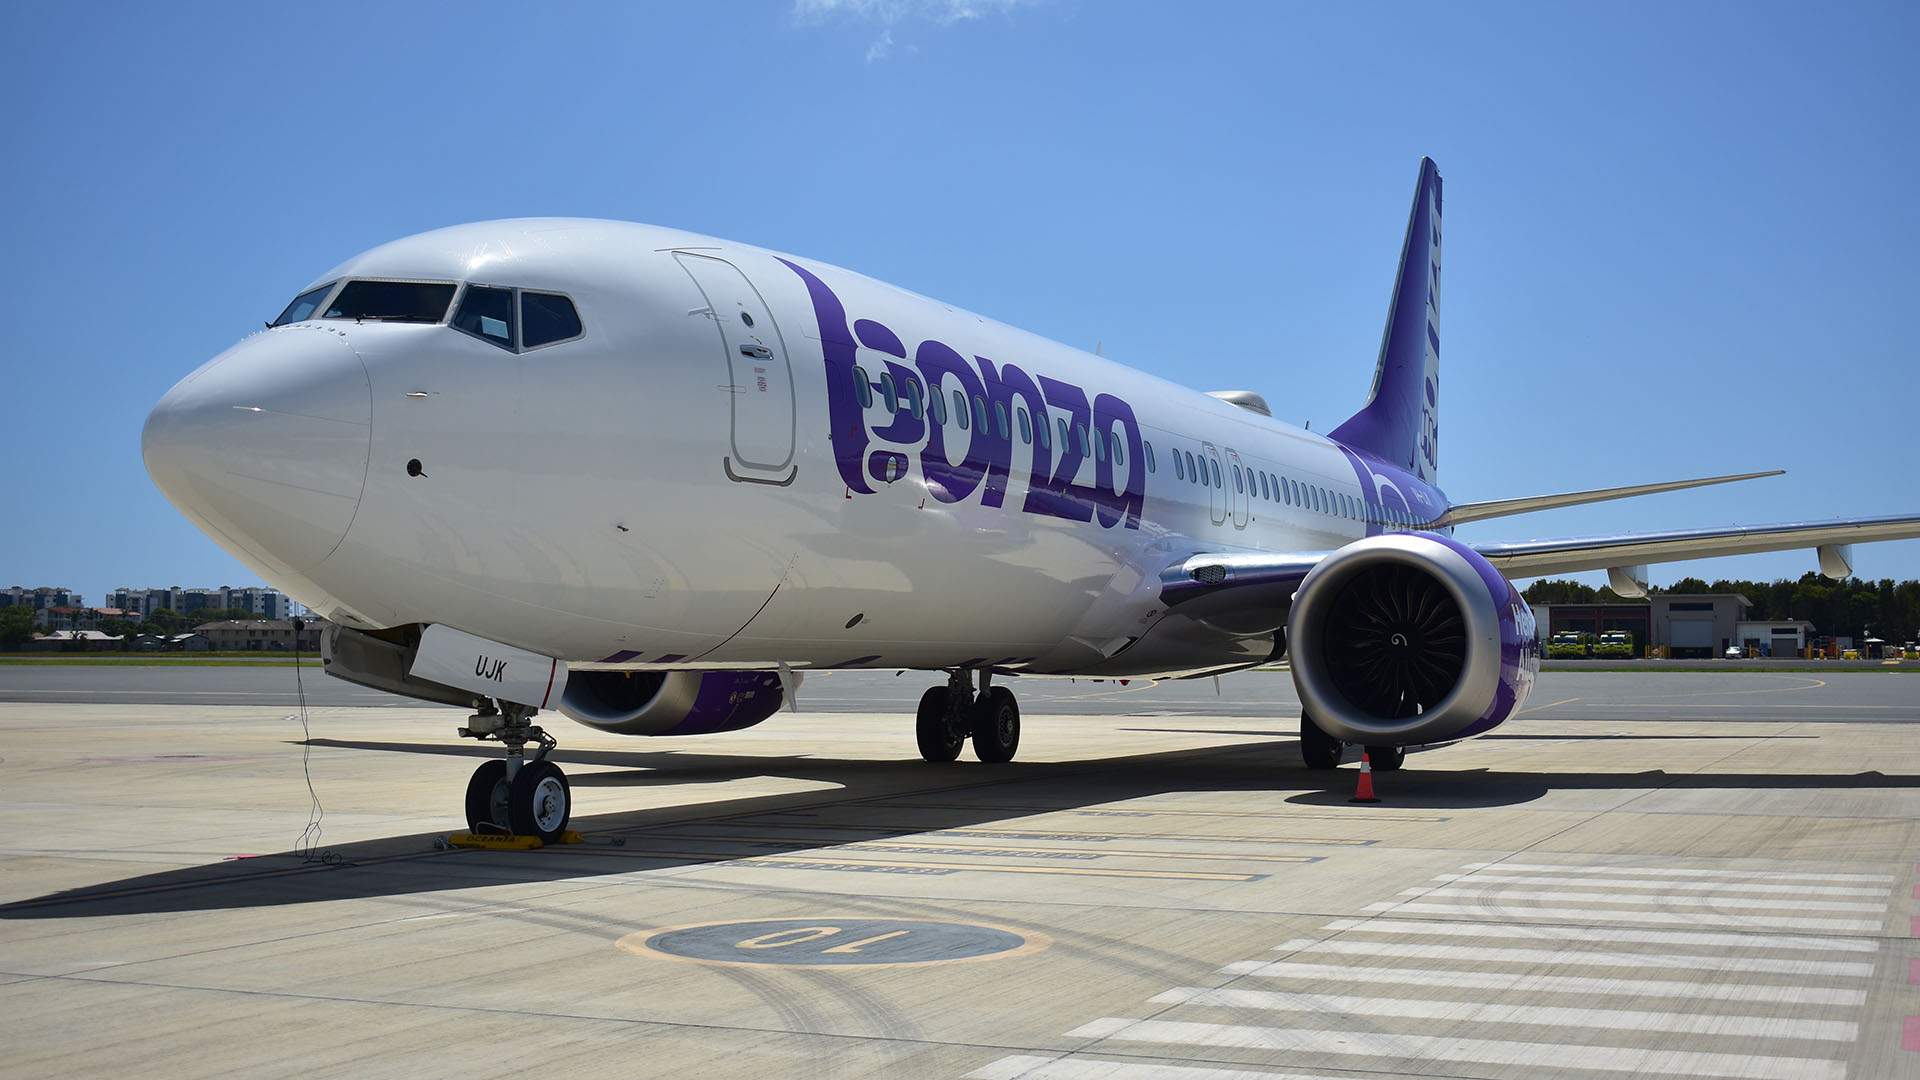 Budget Airline Bonza Has Suspended Flights While It Assesses "the Ongoing Viability of the Business"